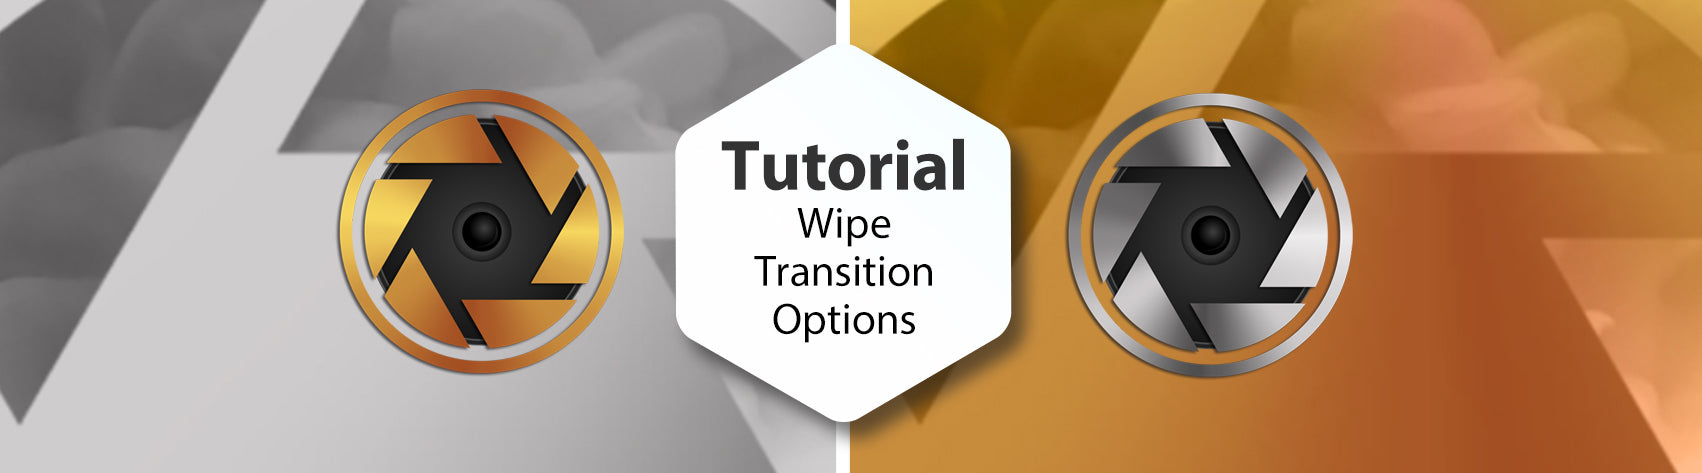 Tutorial - Wipe Transition Options